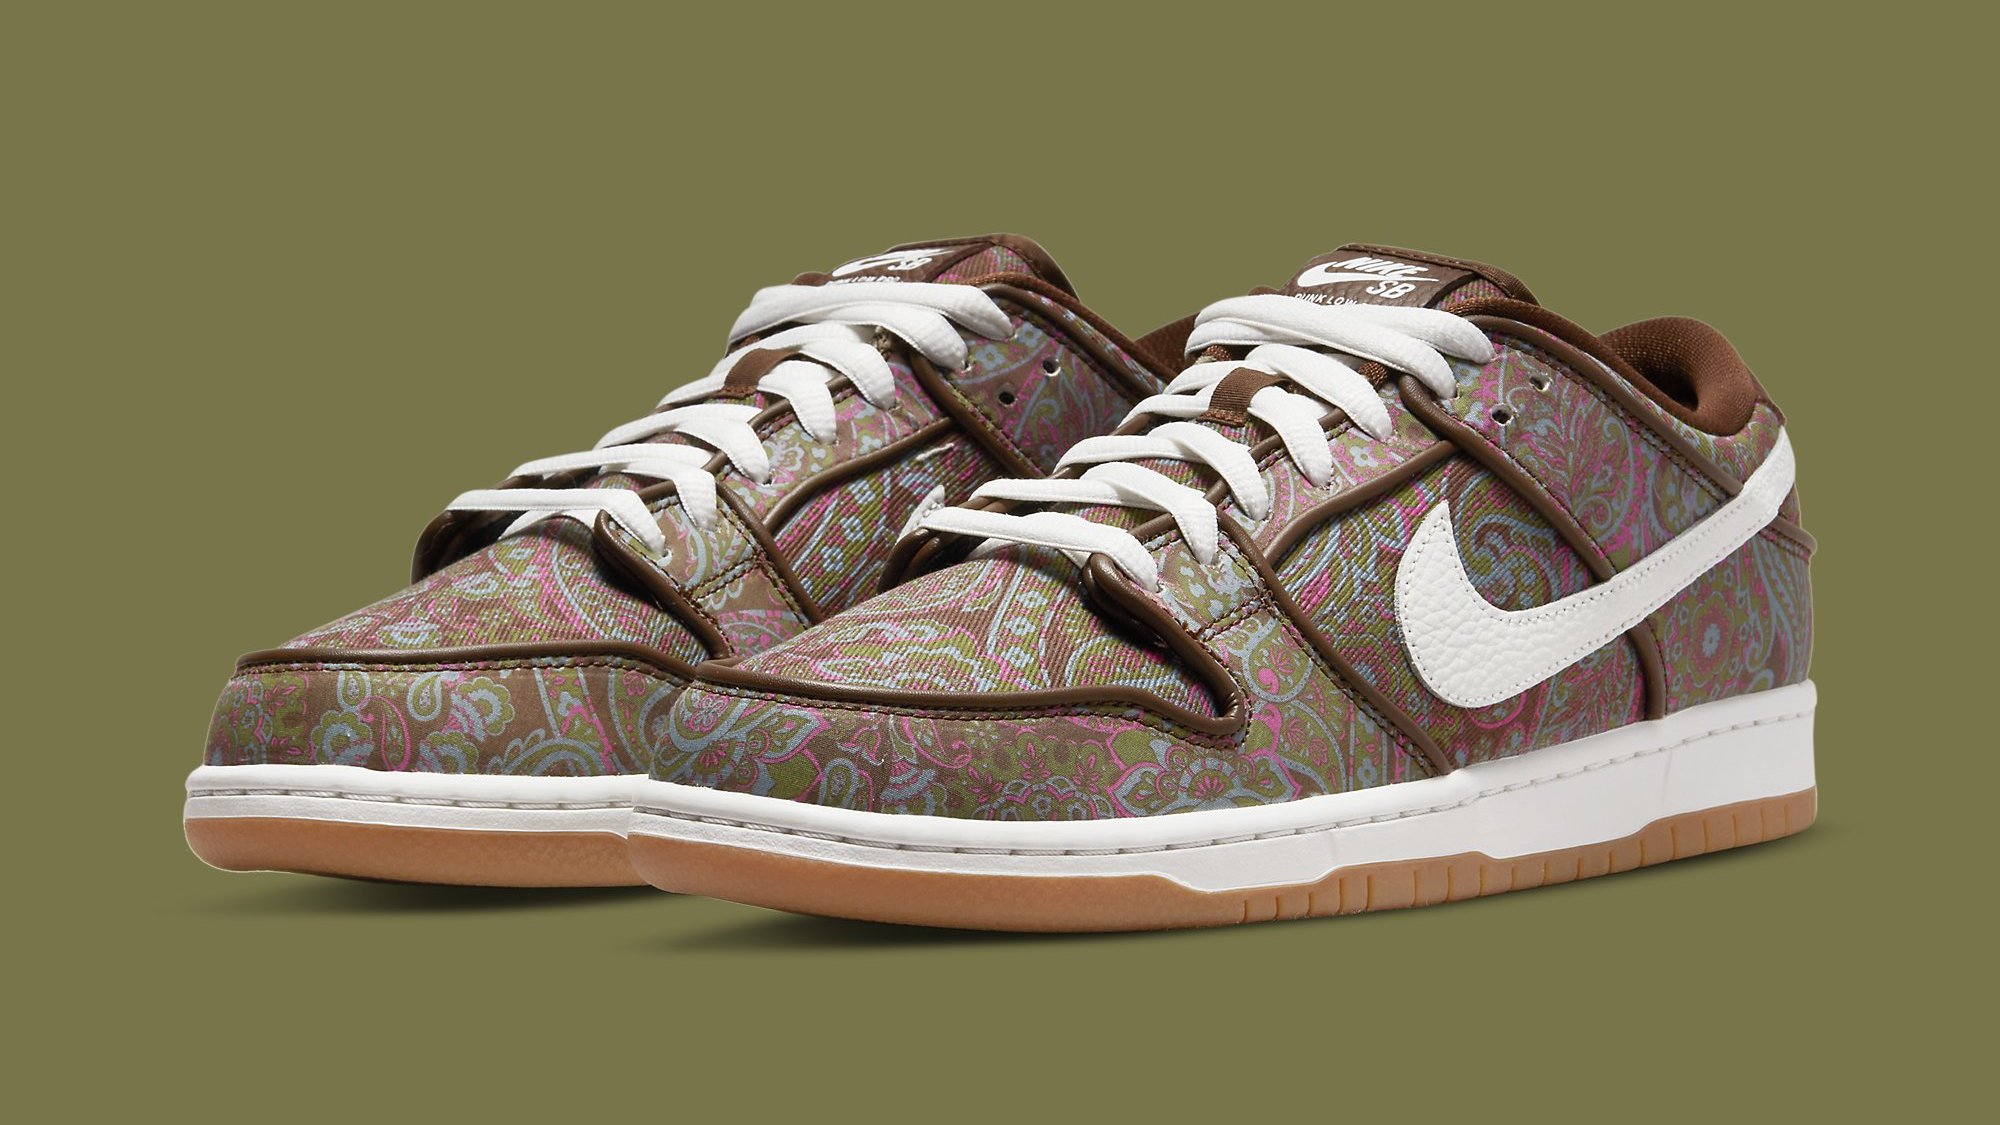 Paisley Prints Cover This Nike SB Dunk | Complex